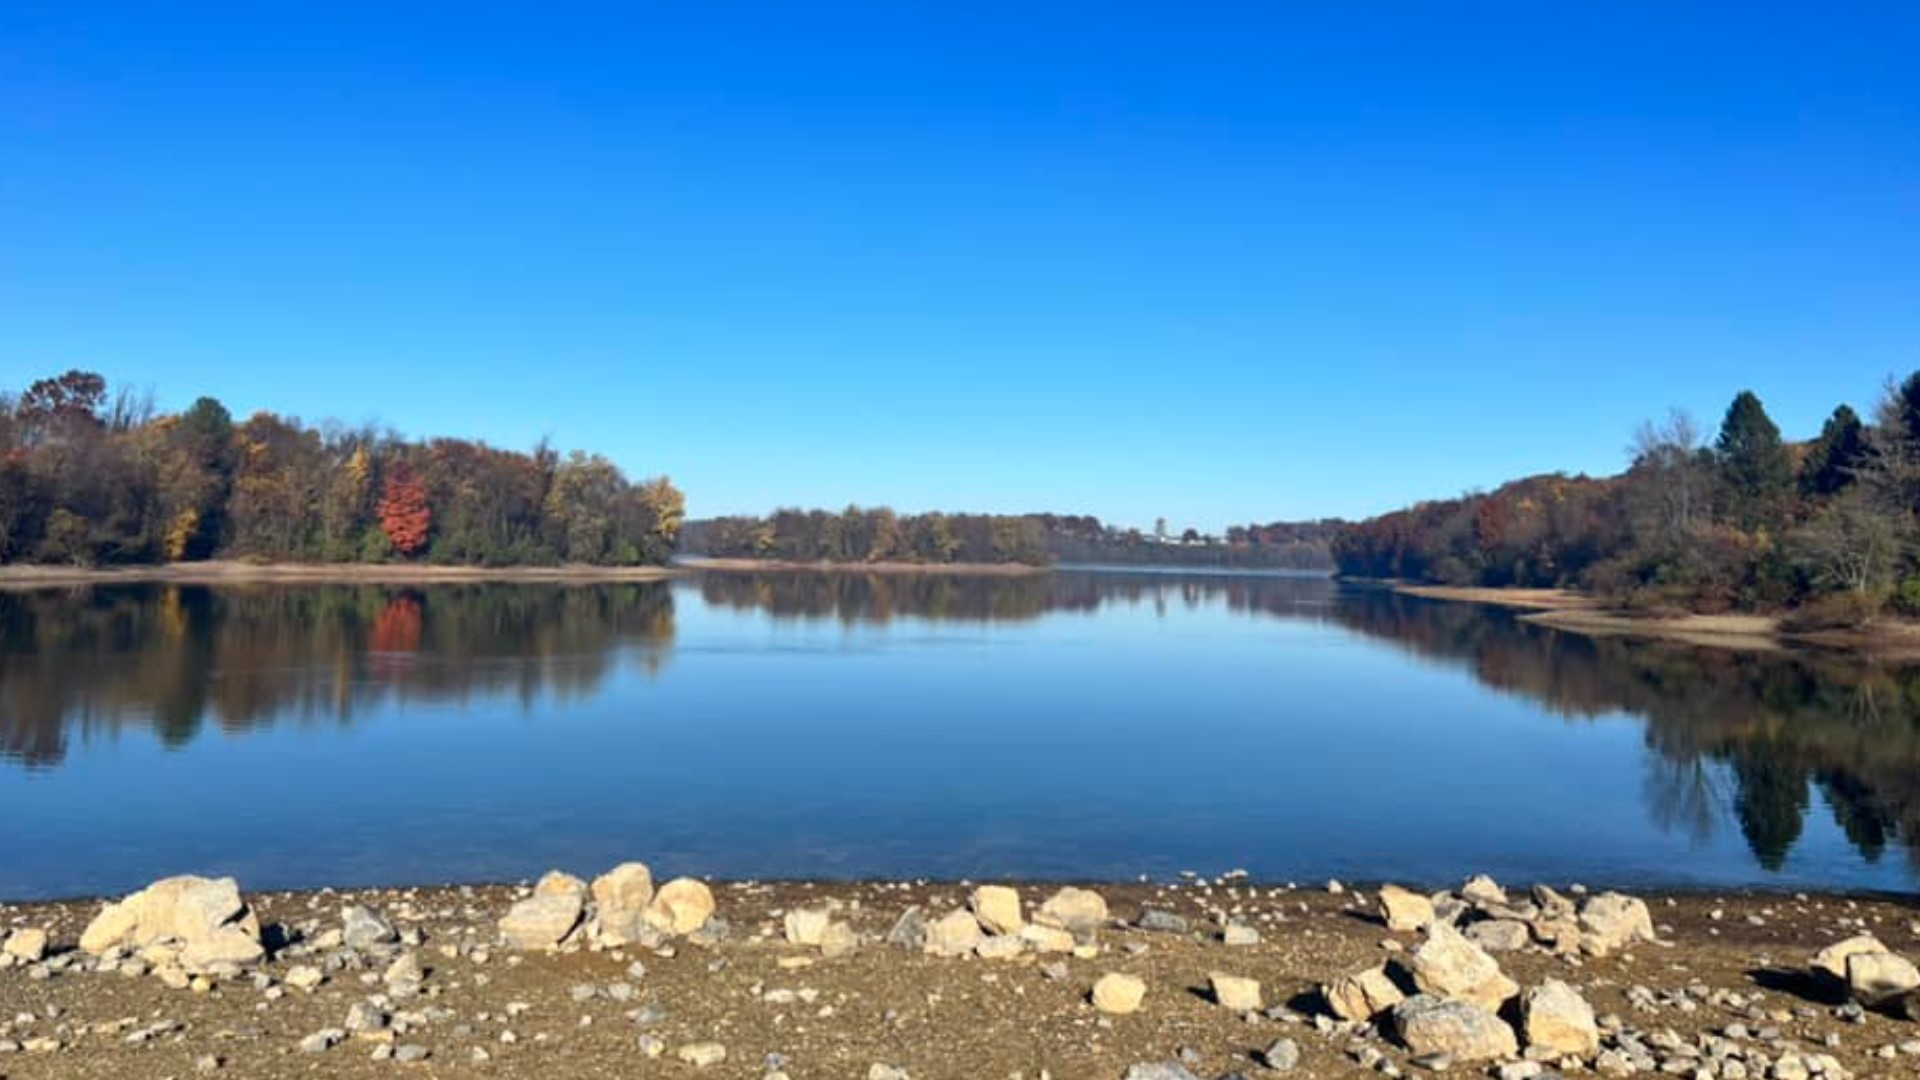 Federal funding through the Pa. Department of Environmental Protection has been allocated to York, Dauphin, Lebanon, and Lancaster Counties to help restore waterways